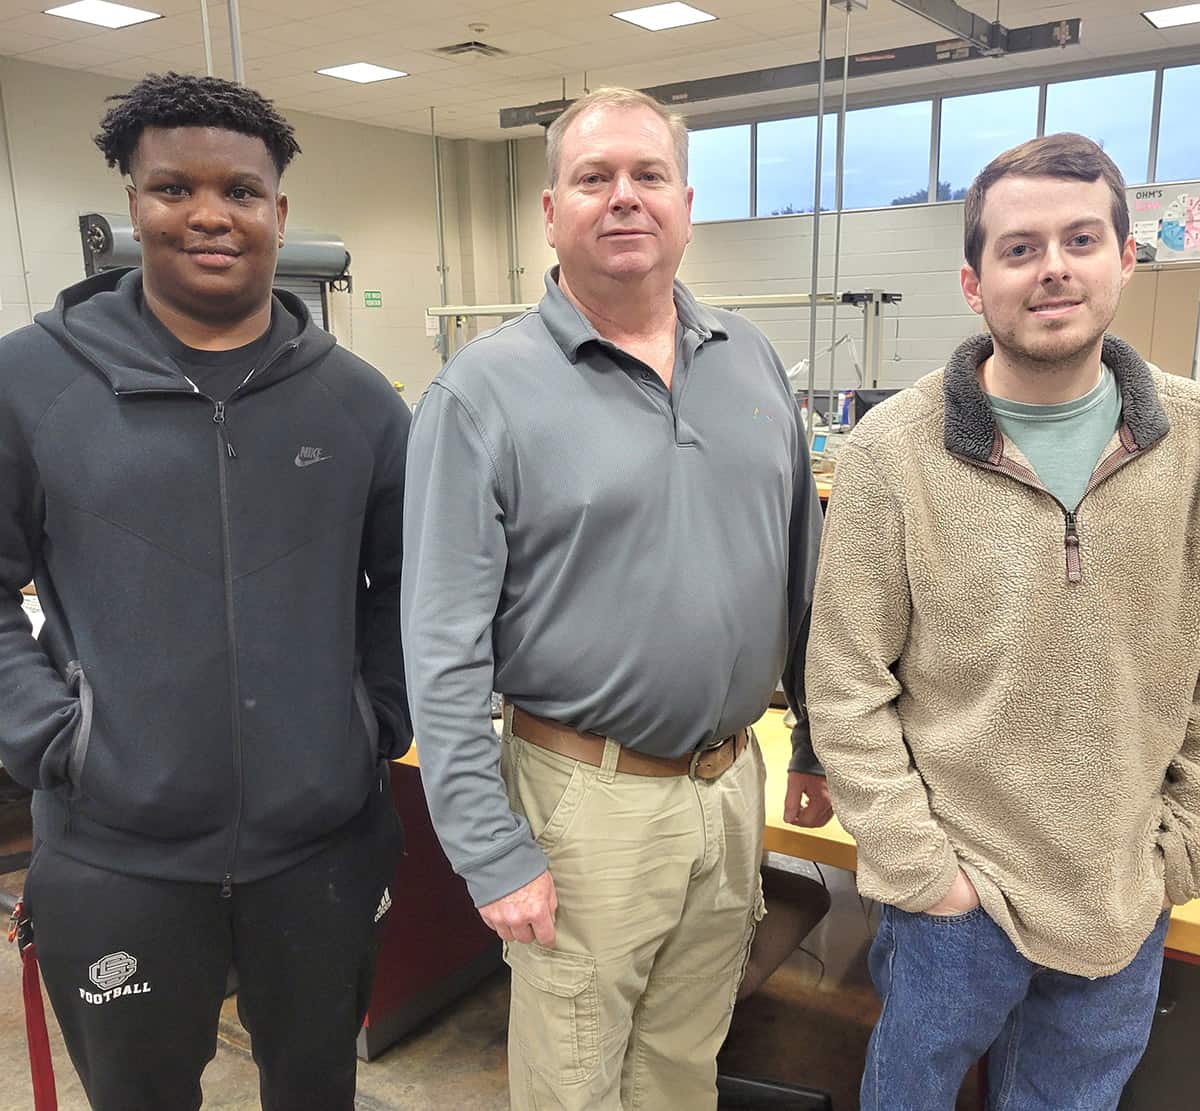 Shown (l to r) are SGTC Electronics student Quentin Edwards, SGTC Electronics Instructor Mike Collins, and student Brent Allegood.